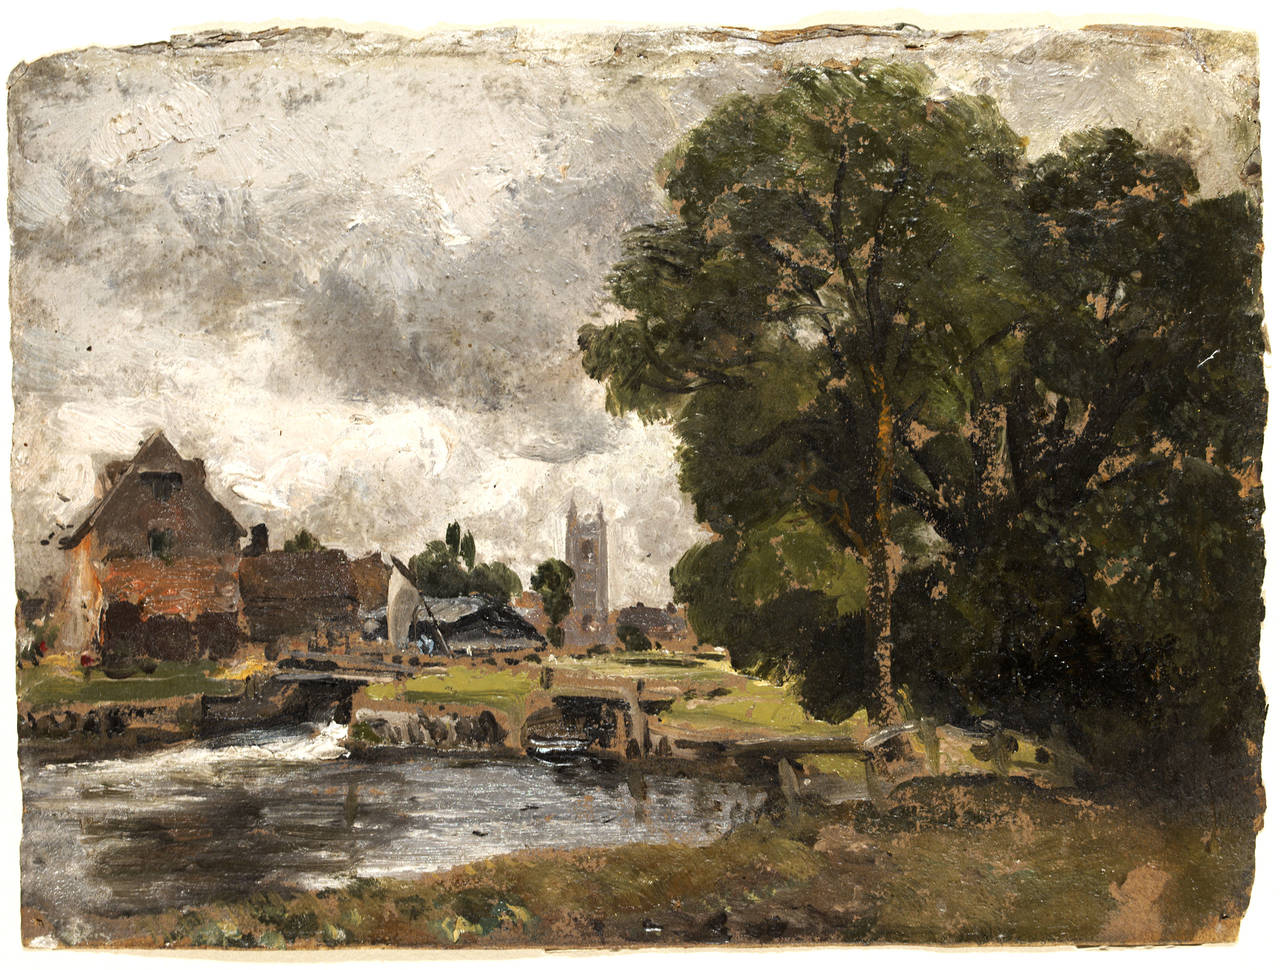 constable mill pond; oil paint on paper